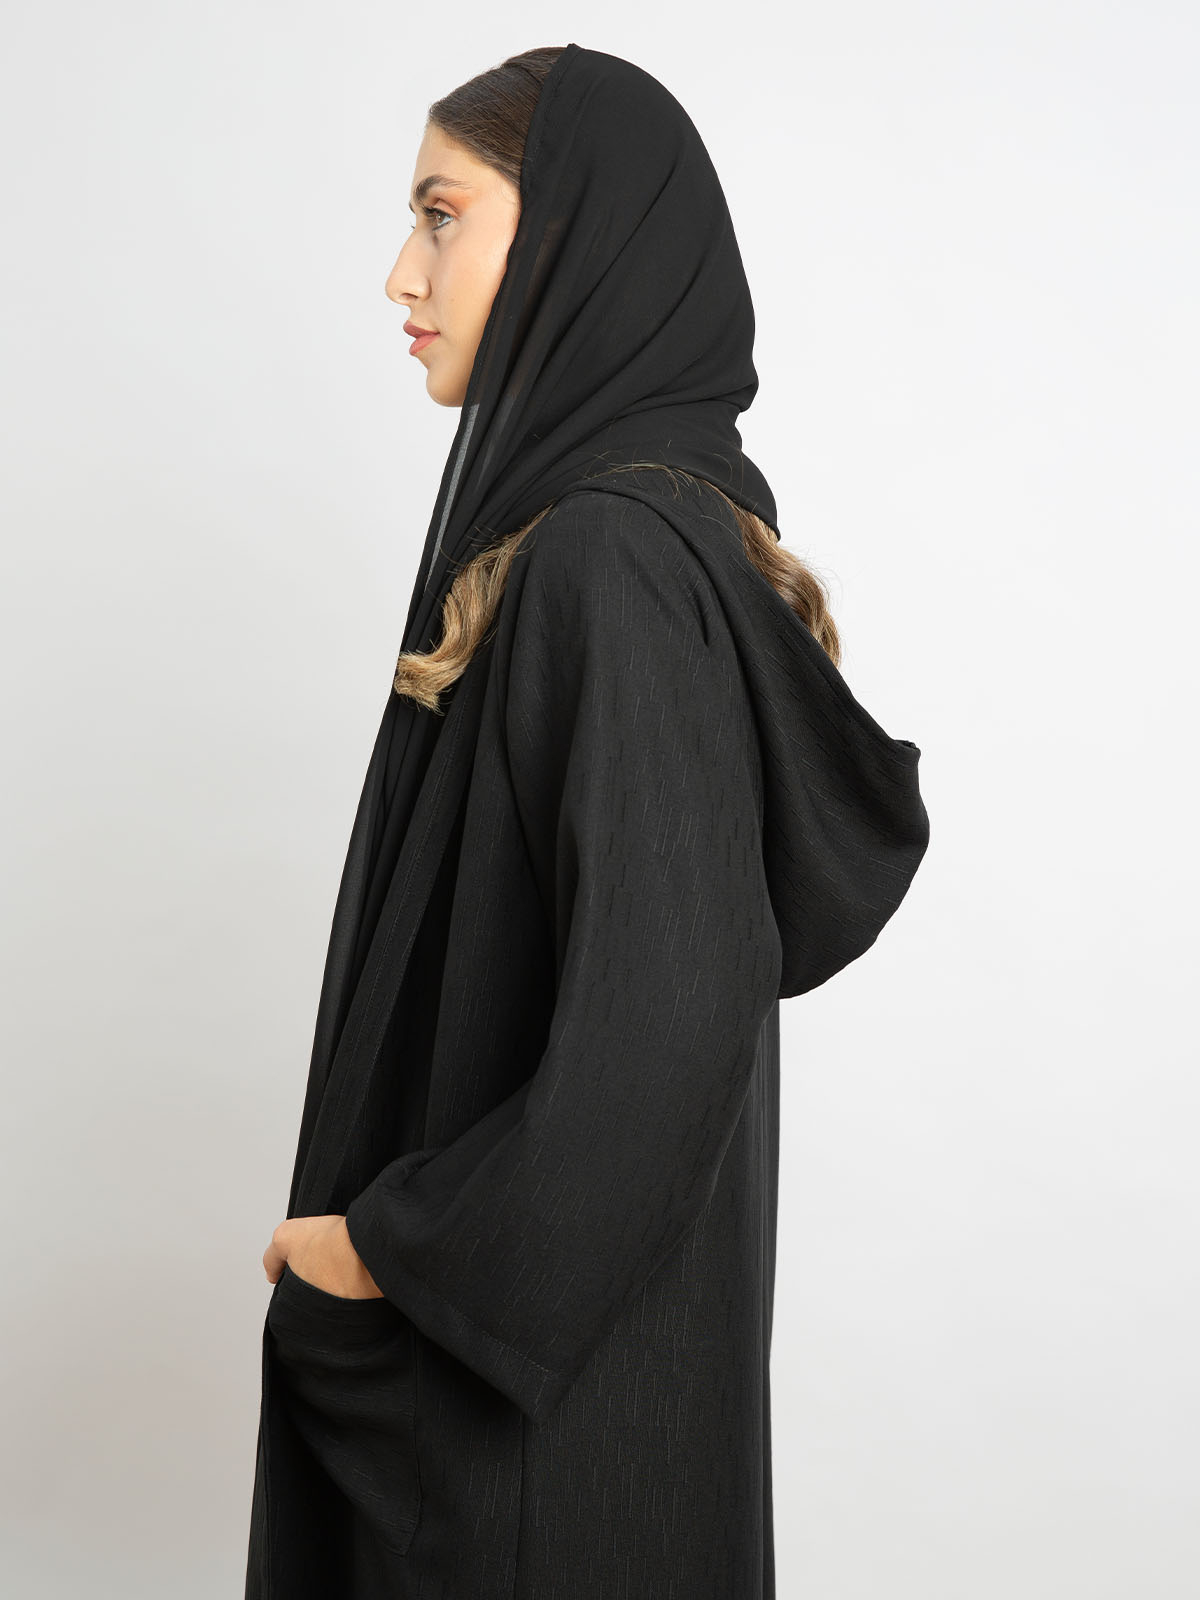 Black - Long Open Regular-fit Abaya in Jacquard with Hoodie